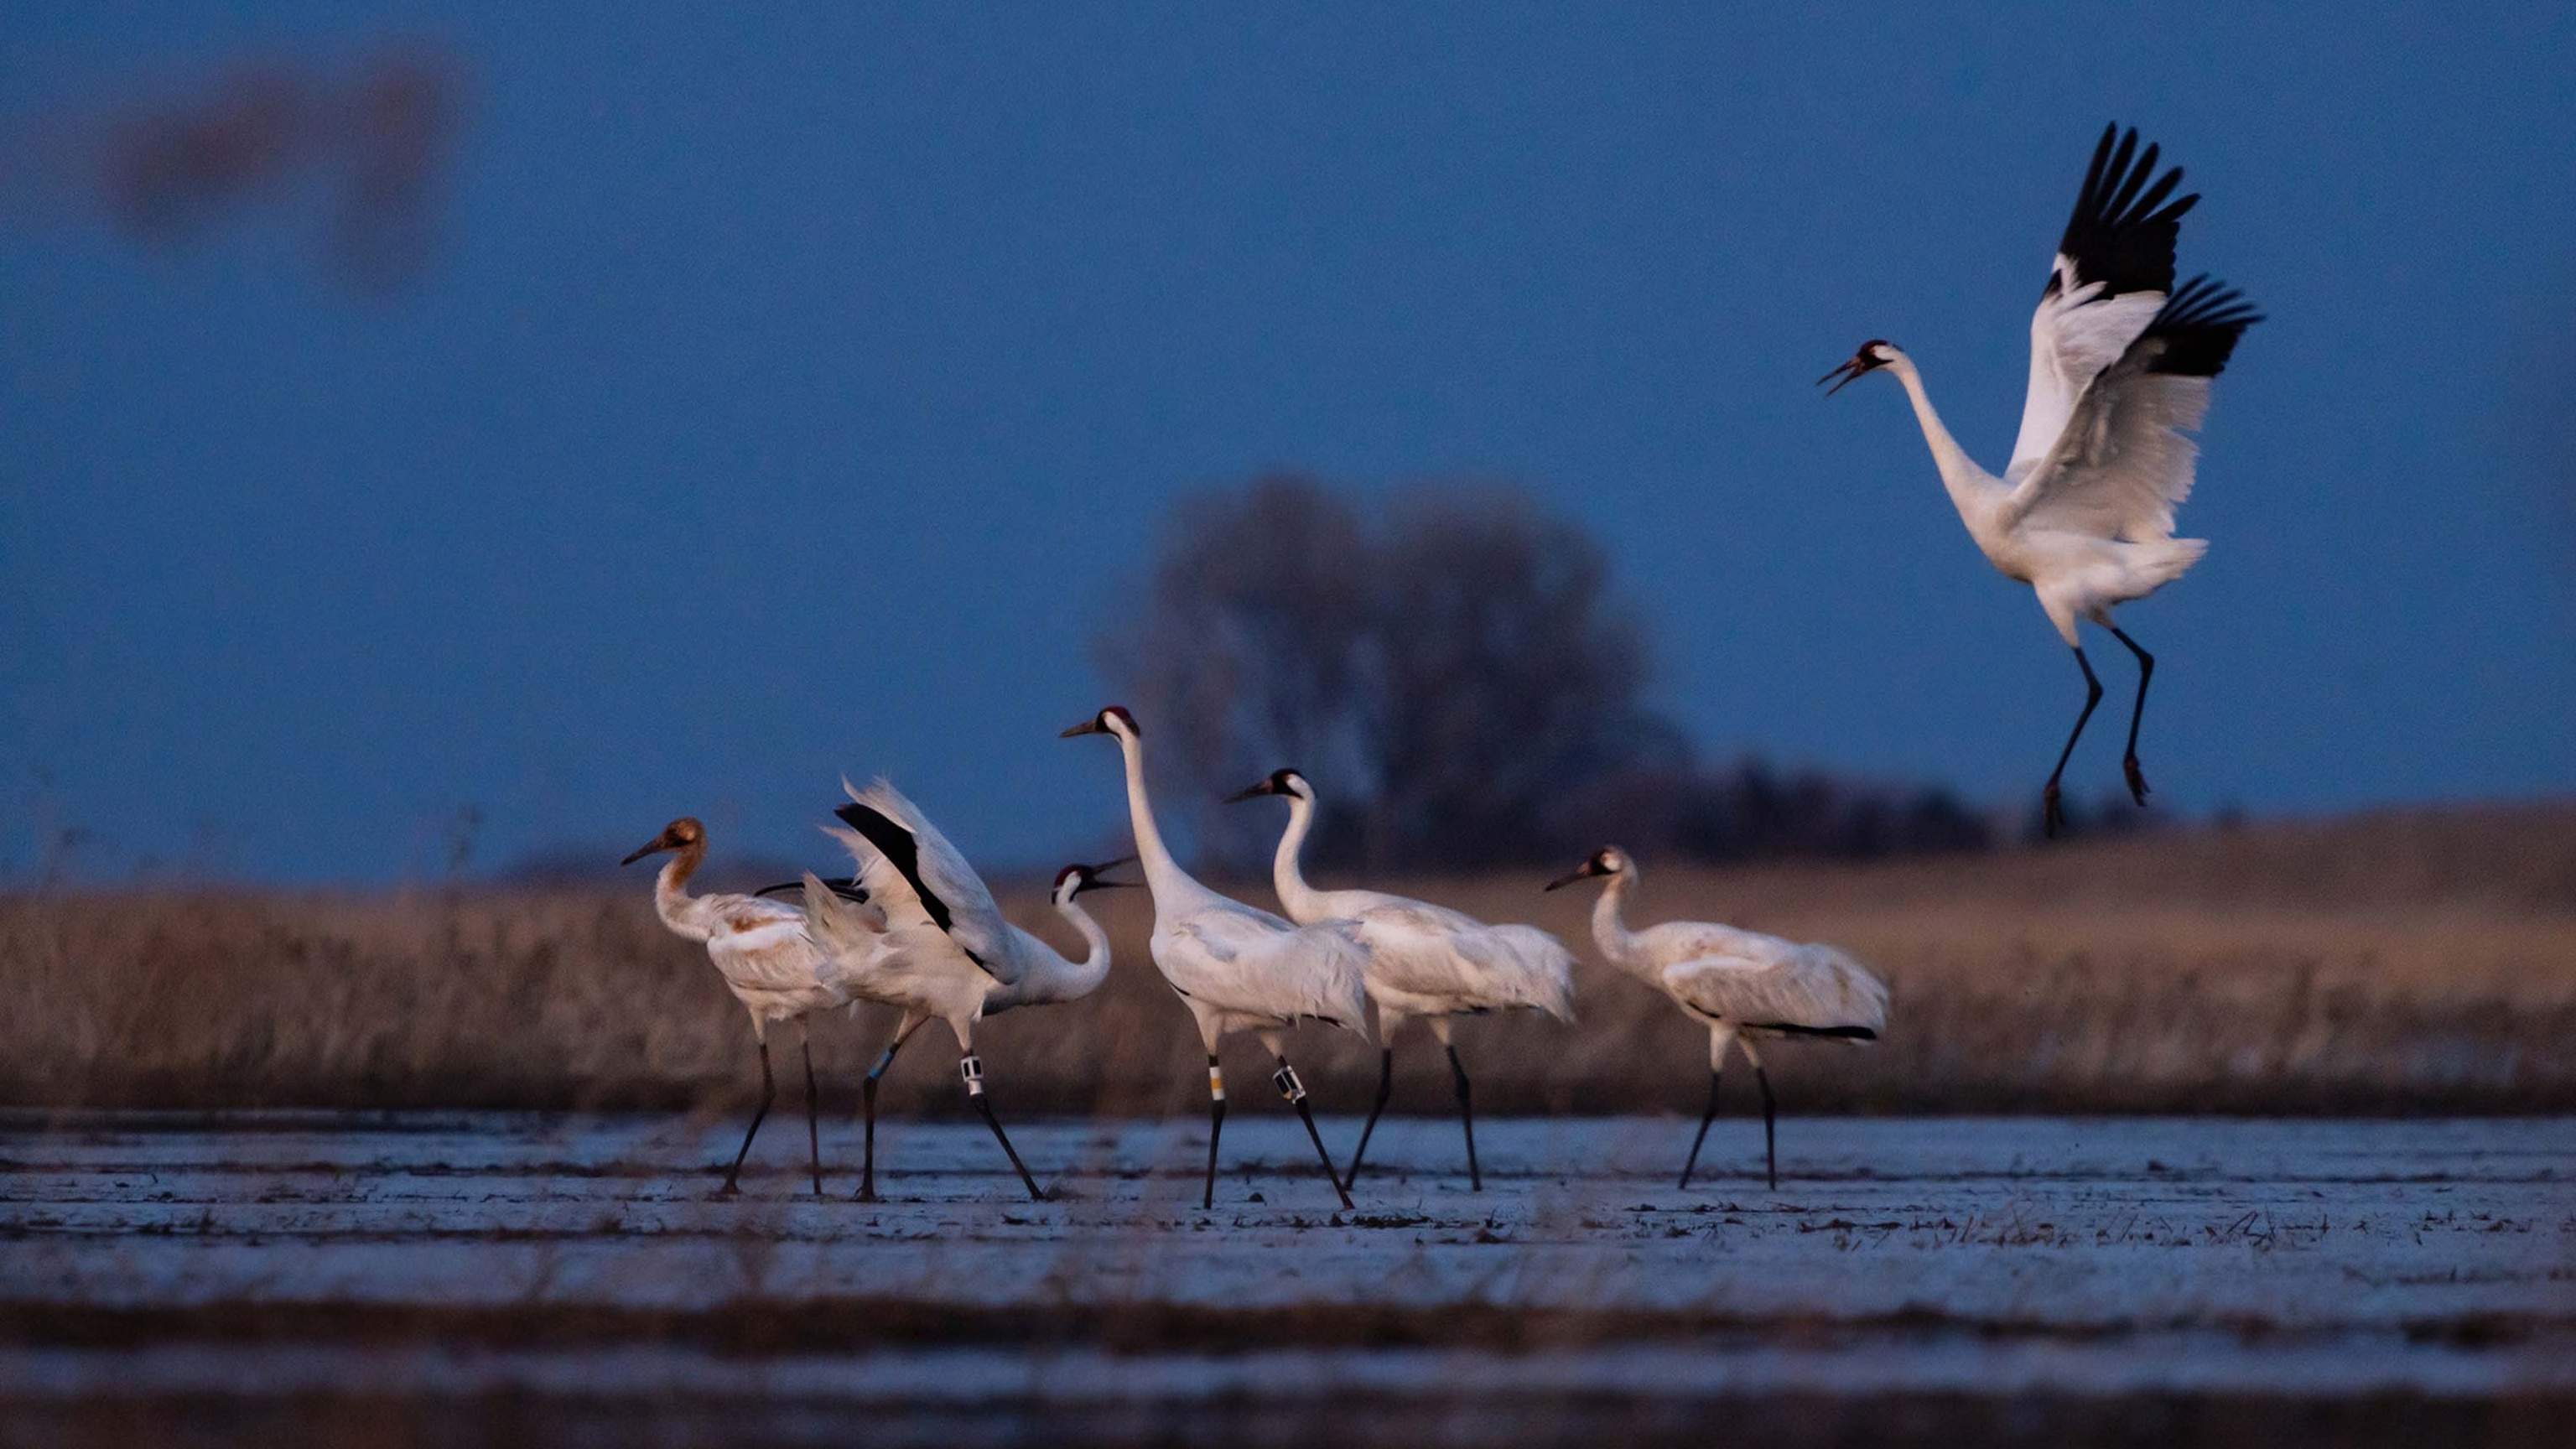 5 cranes on the grown and one with its wings out landing. The one with its wings out has black feathers at the end of its wings.